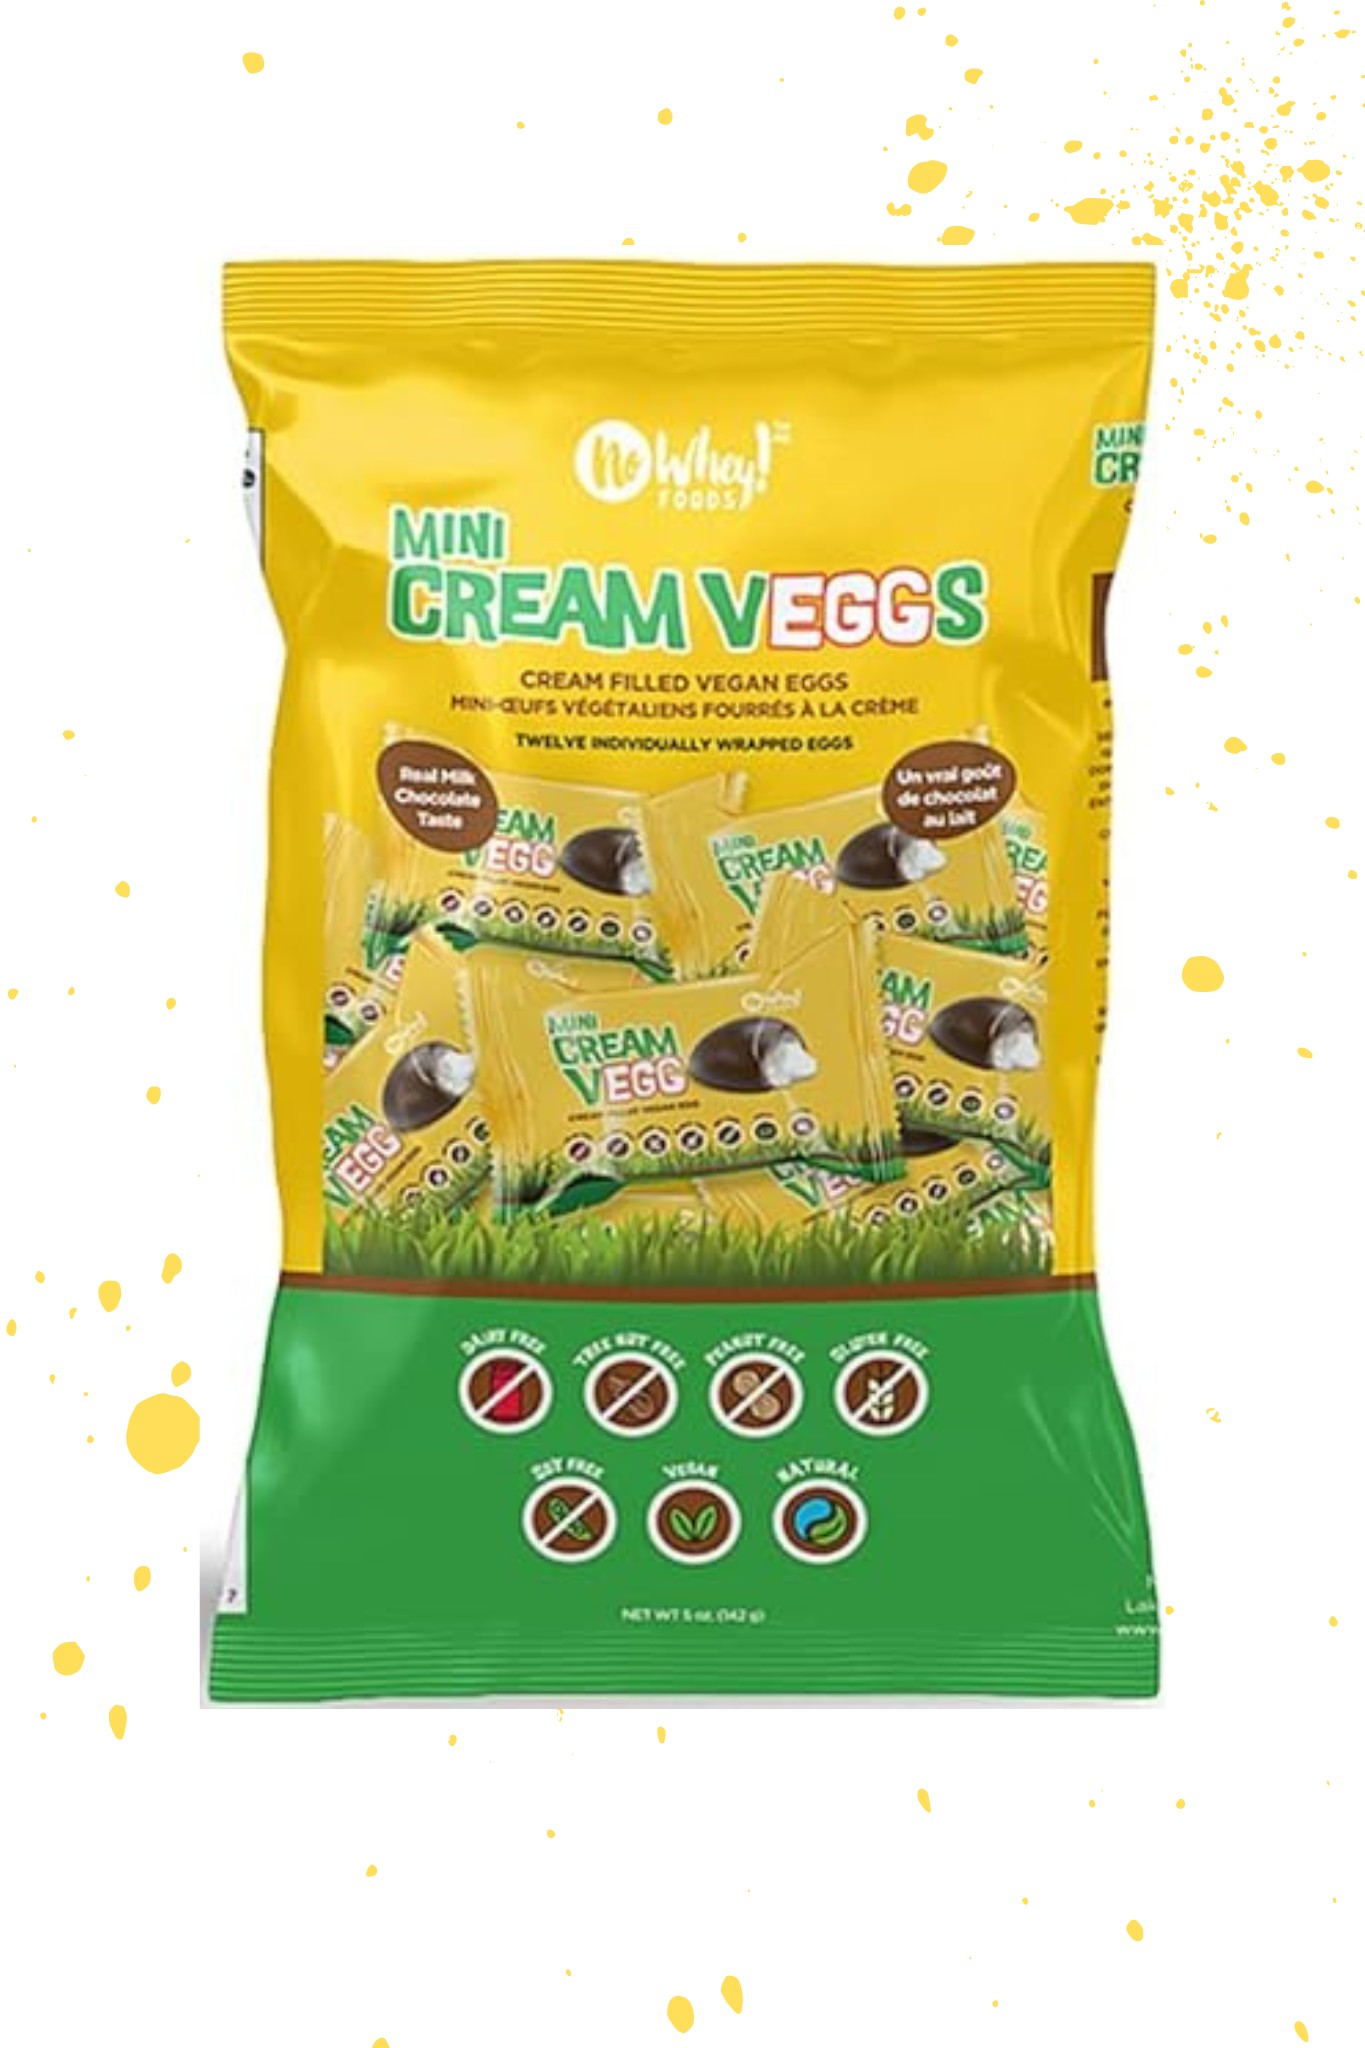 A bag of gluten free Easter cream filled eggs made with allergen-friendly ingredients.